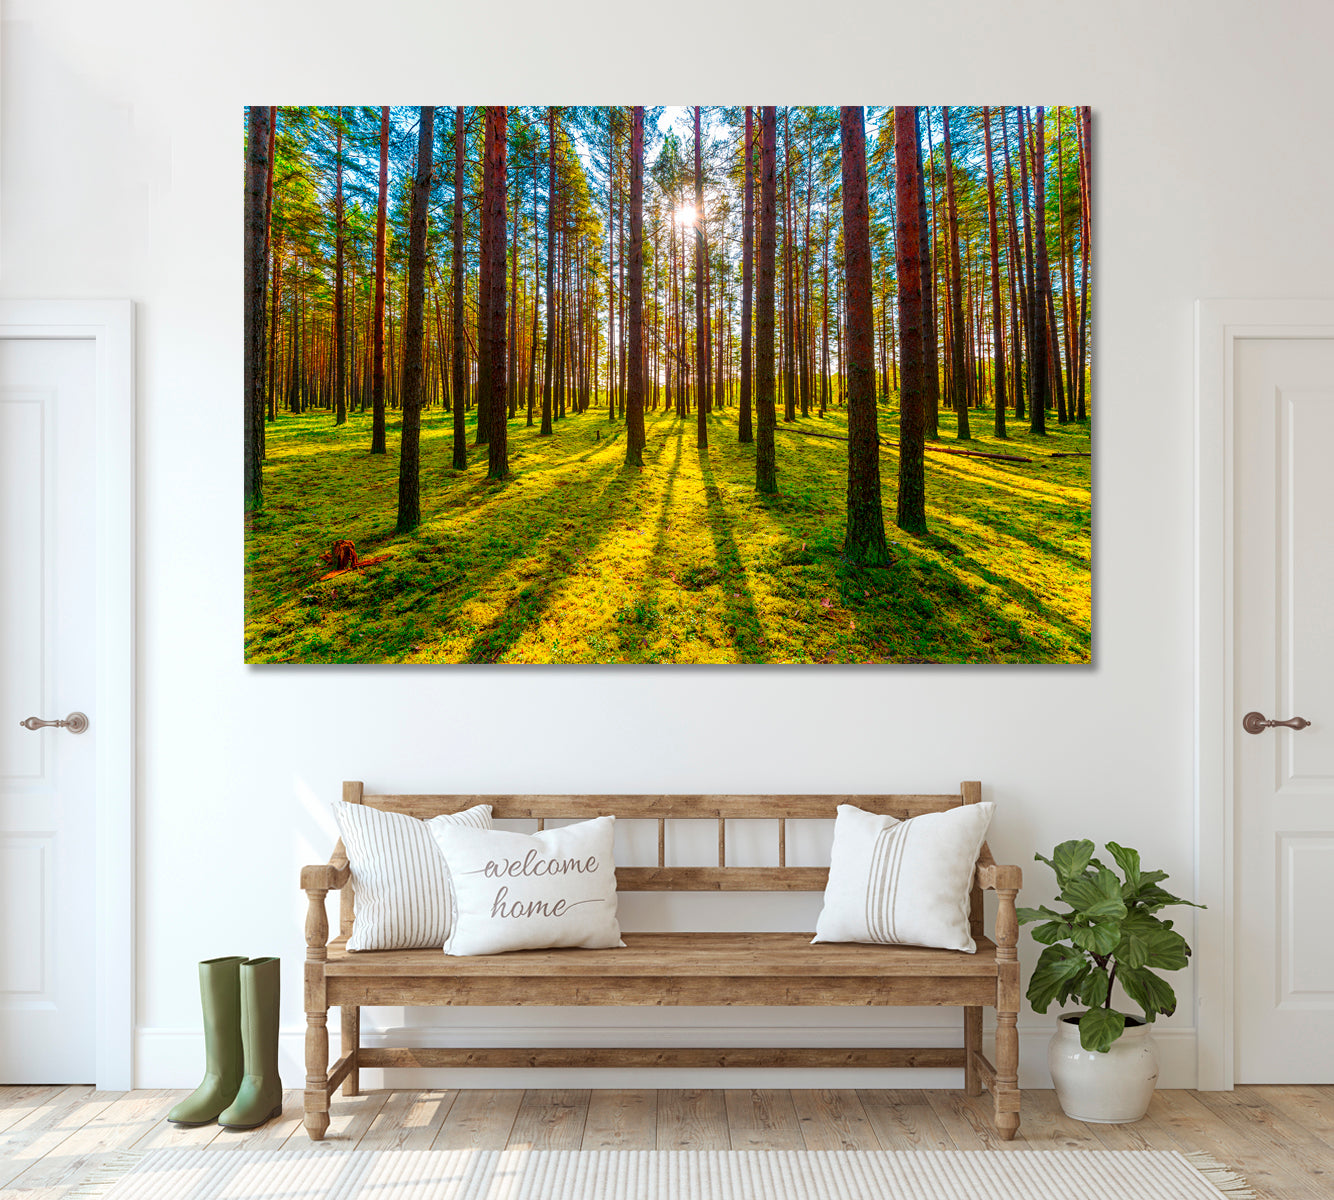 Sun Rays in Pine Forest Canvas Print ArtLexy 1 Panel 24"x16" inches 